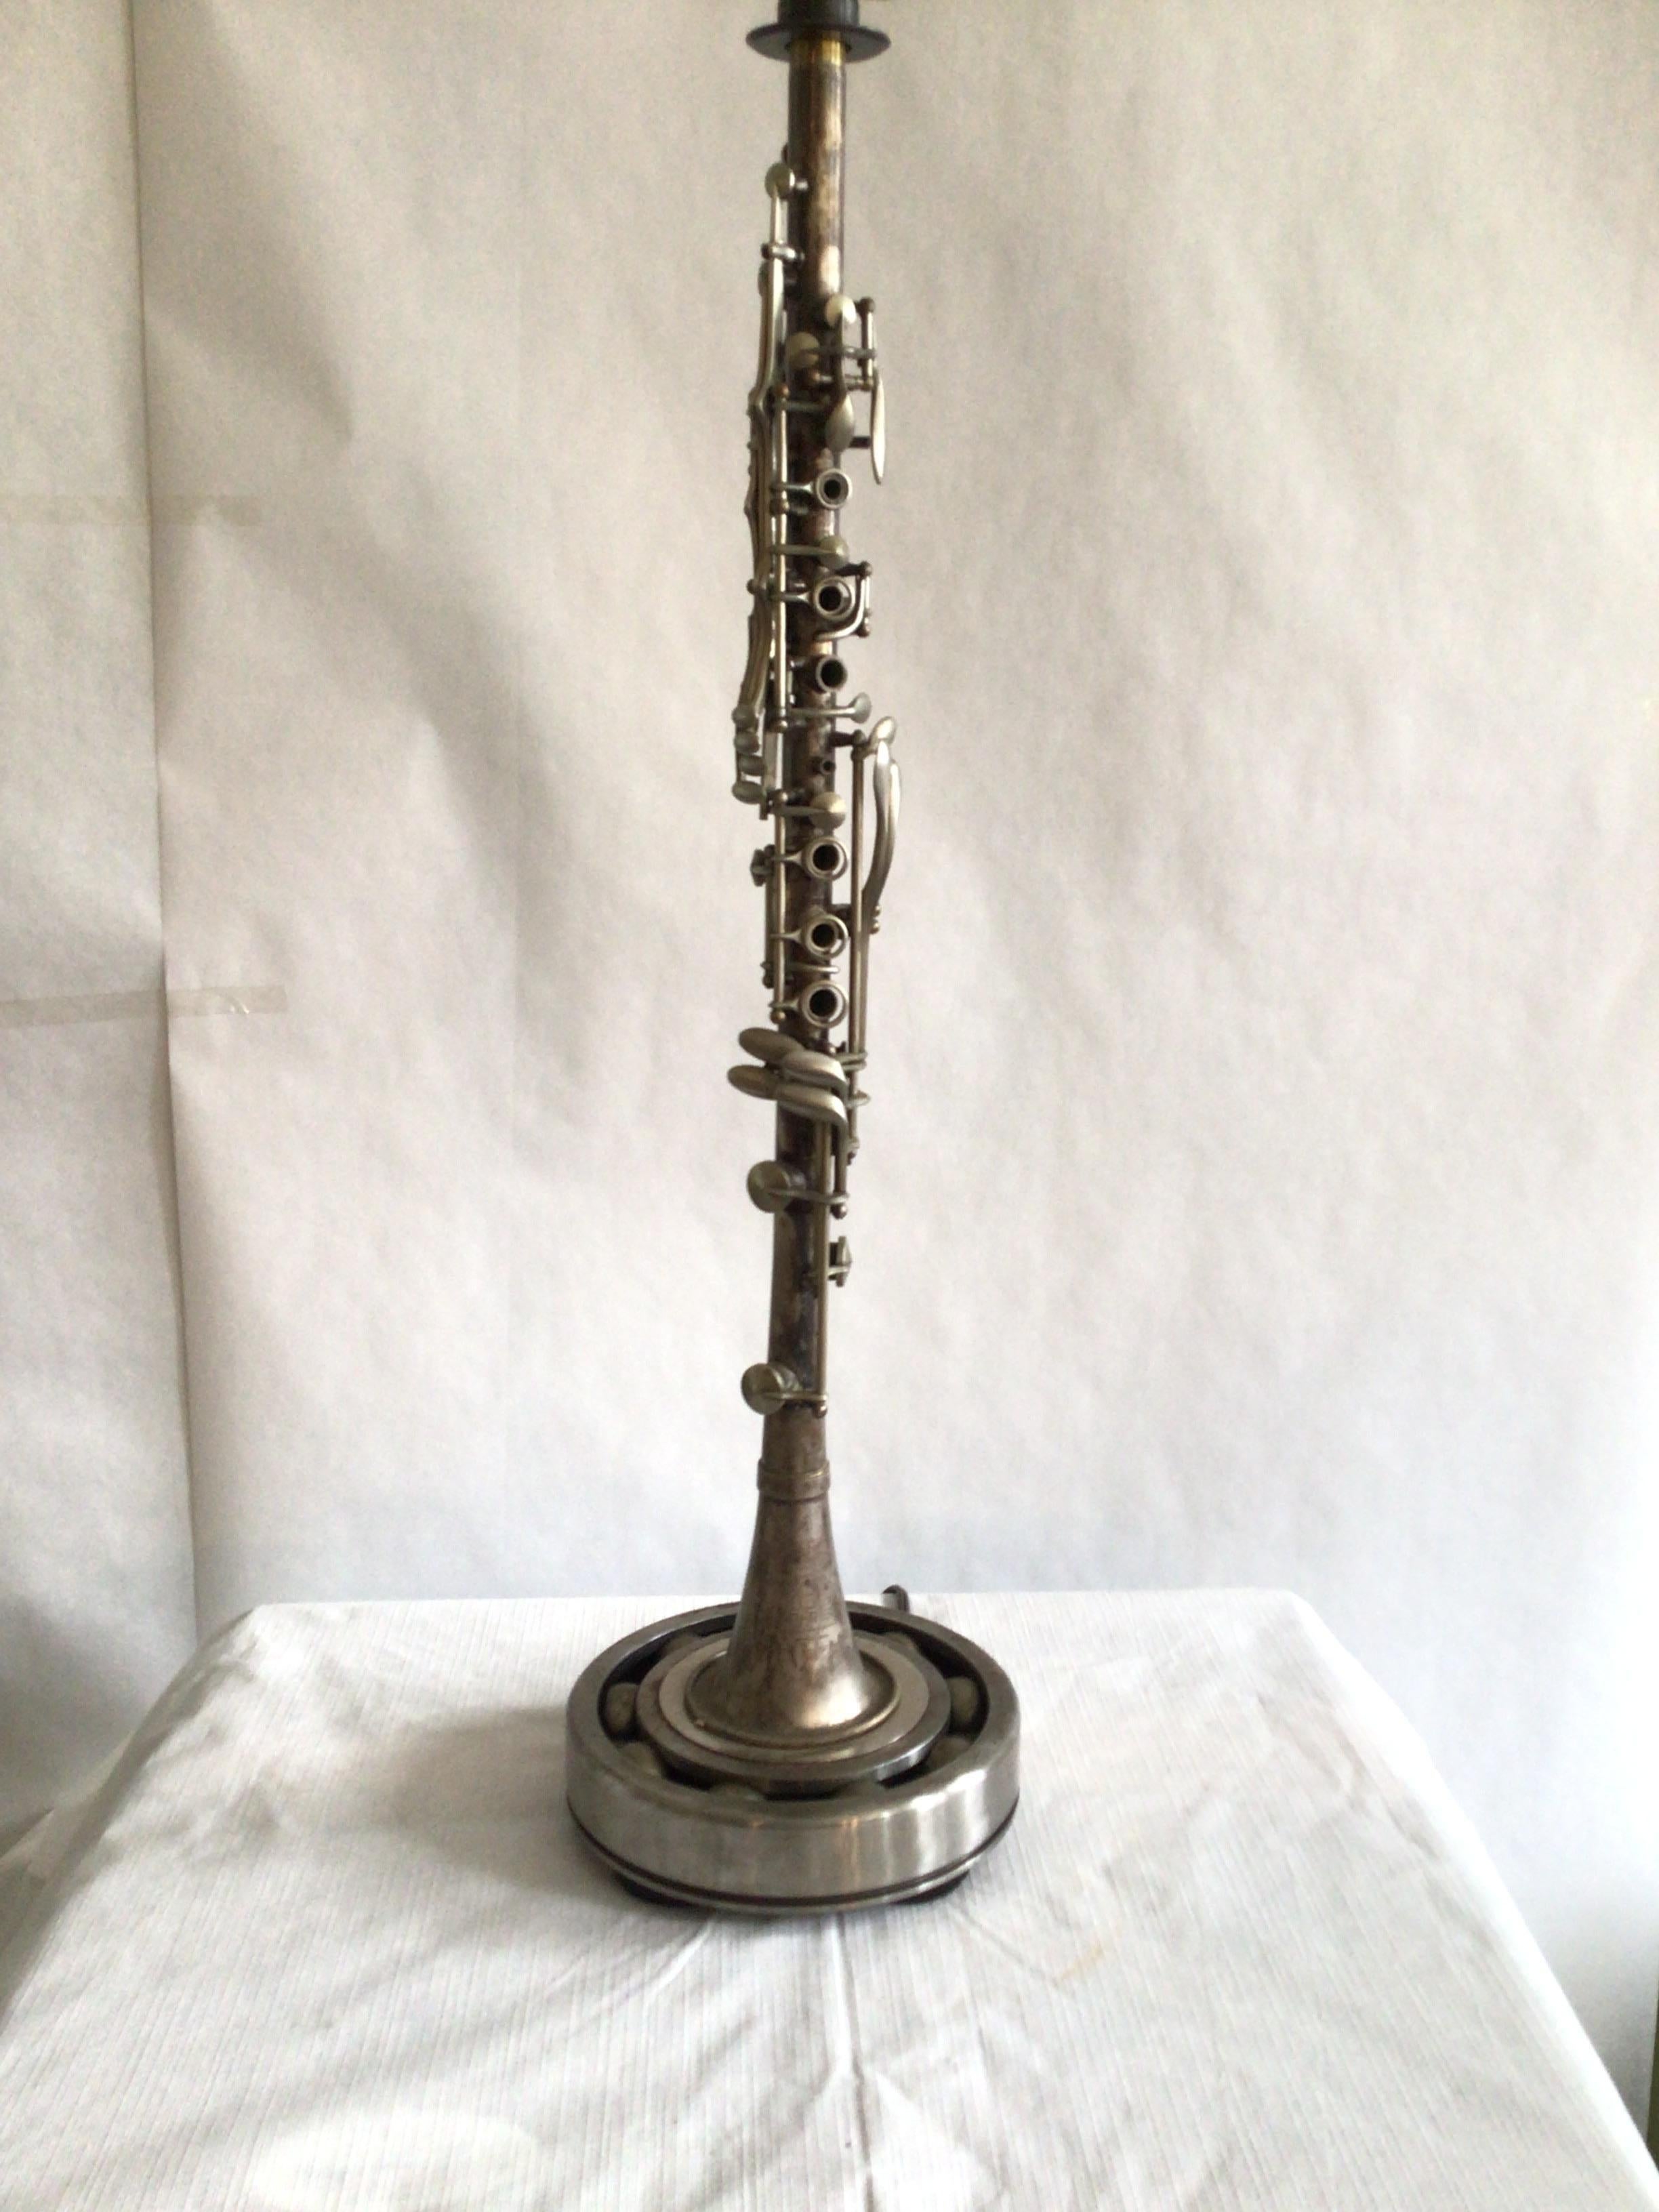 1960s Metal industrial musical instrument clarinet table lamp.
Signed PARIS.
Numbered 8/11.
Height to top of socket.